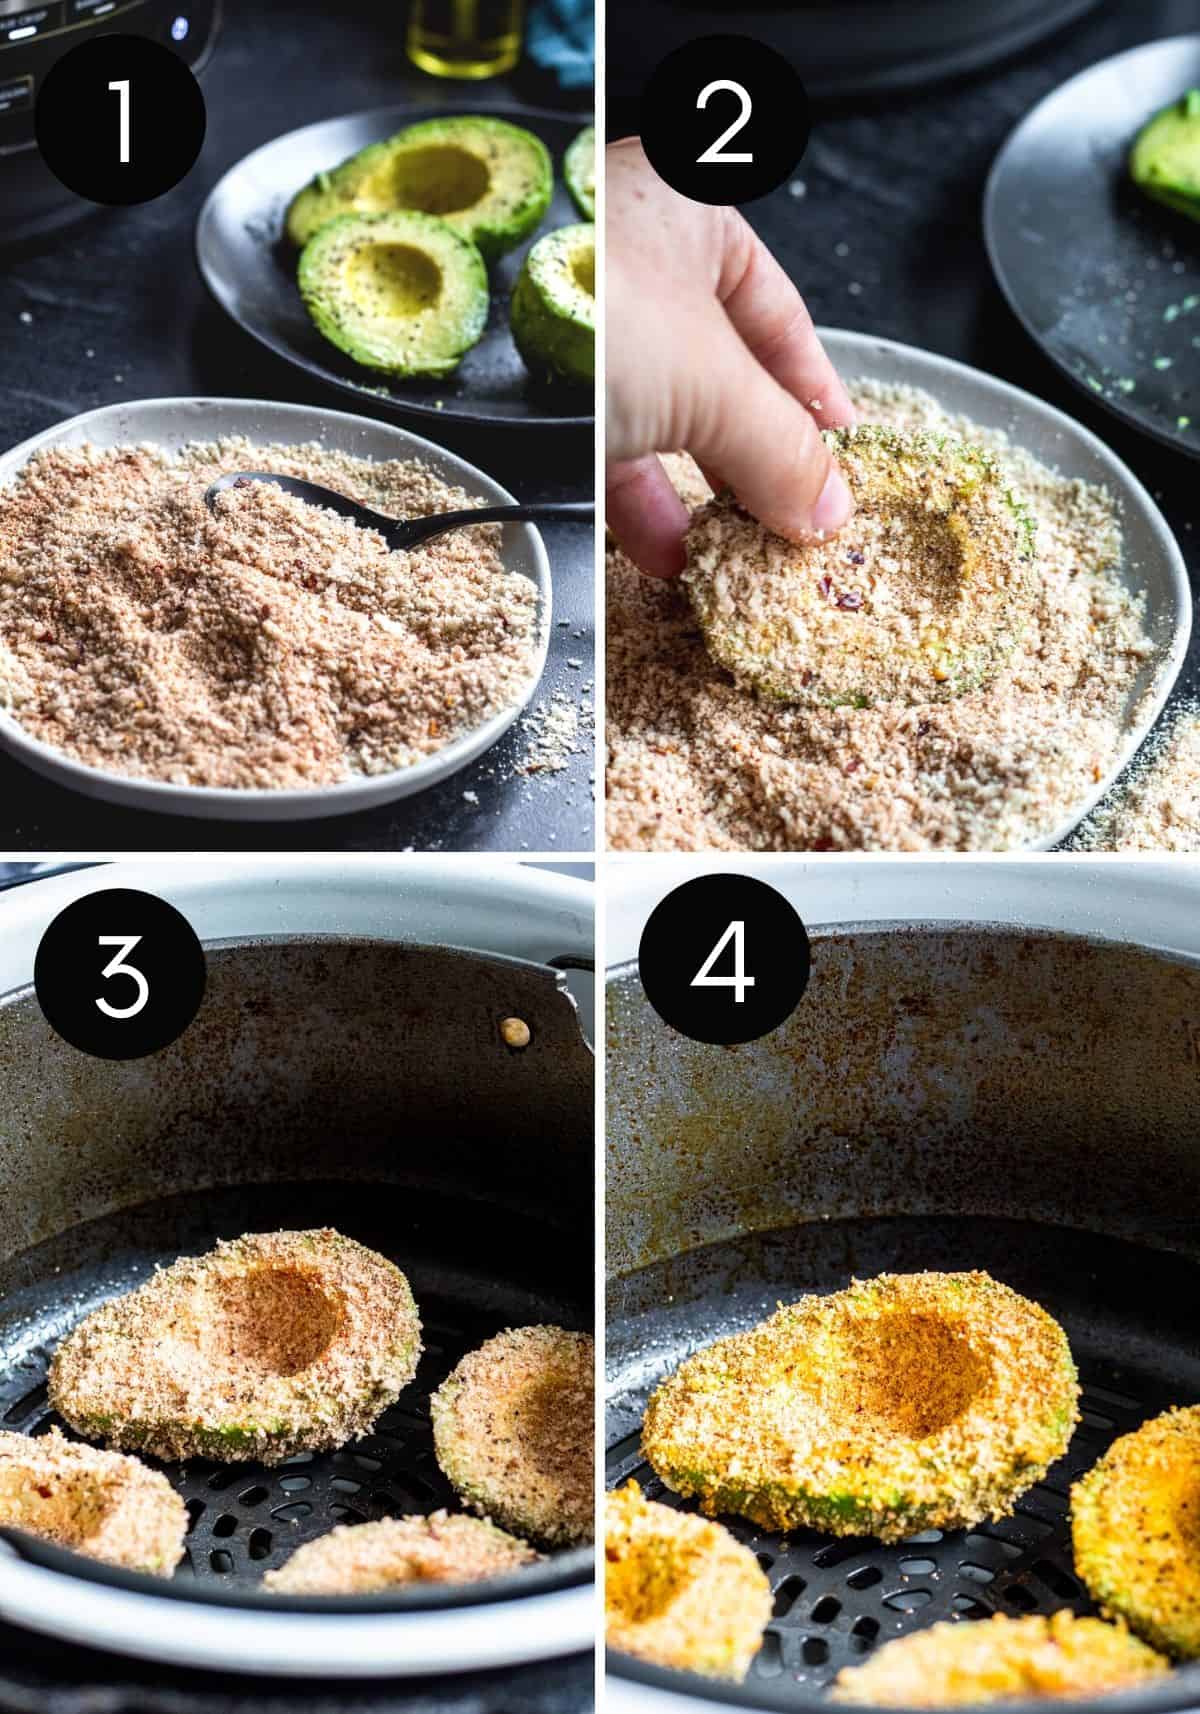 Avocados being breaded then air fried in air fryer.